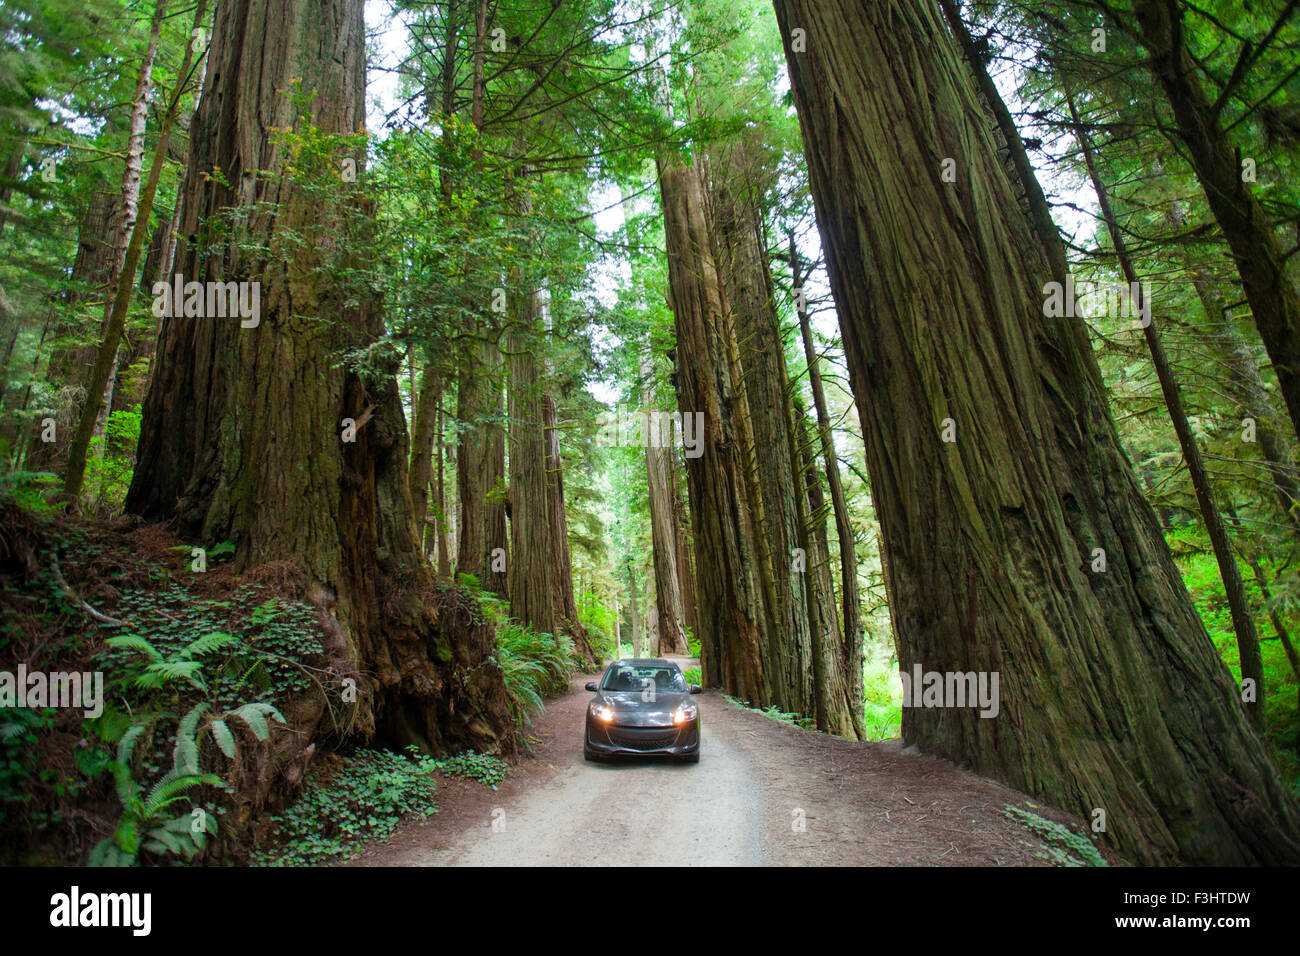 A woman takes a picture of a giant Redwood Tree in Jedediah Smith Redwoods State Park. Stock Photo